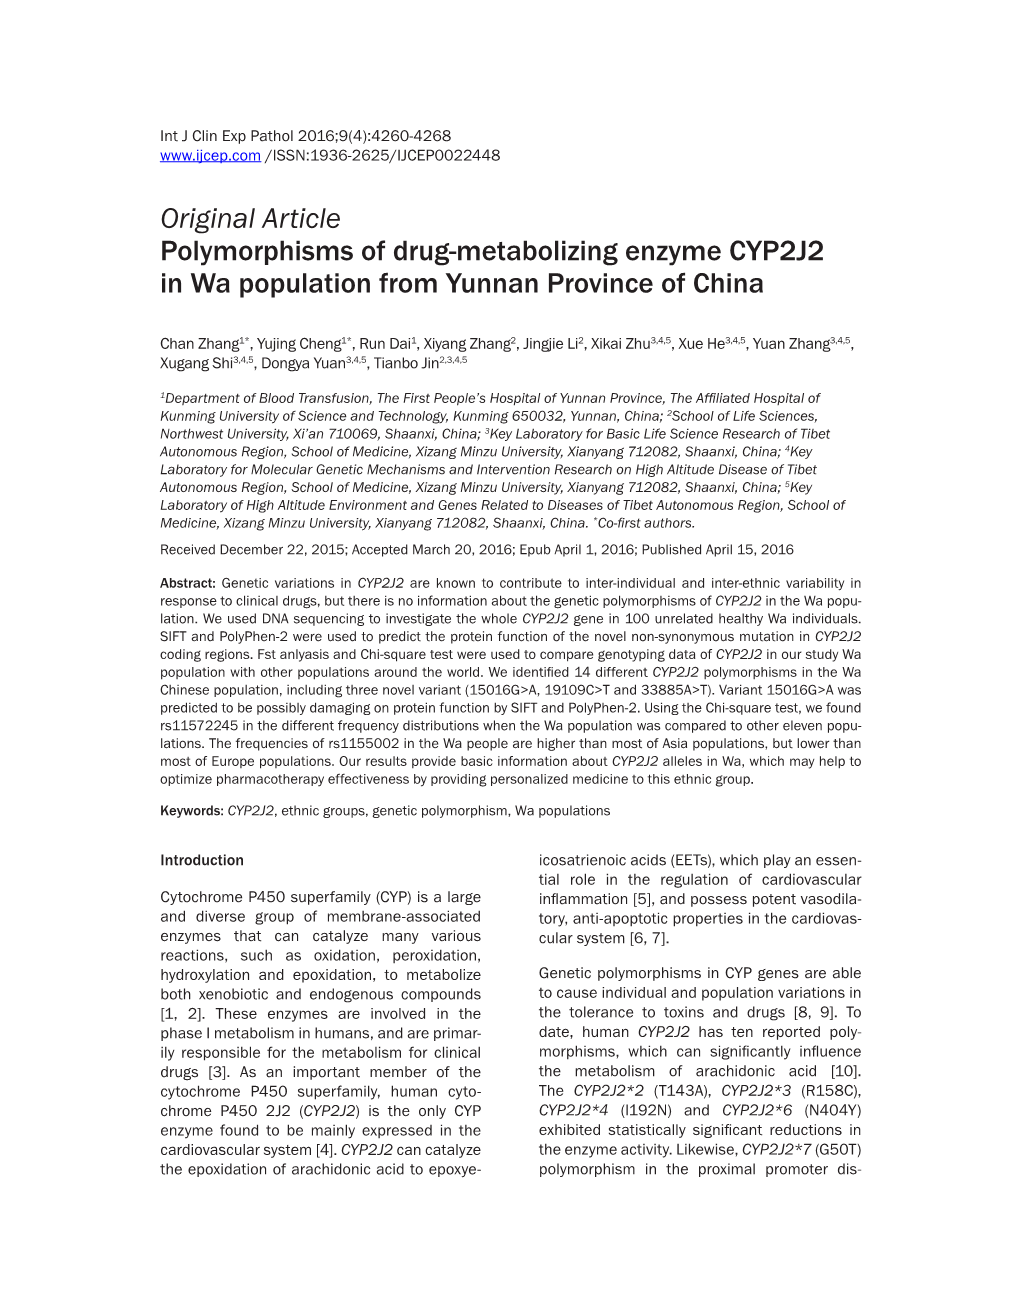 Original Article Polymorphisms of Drug-Metabolizing Enzyme CYP2J2 in Wa Population from Yunnan Province of China